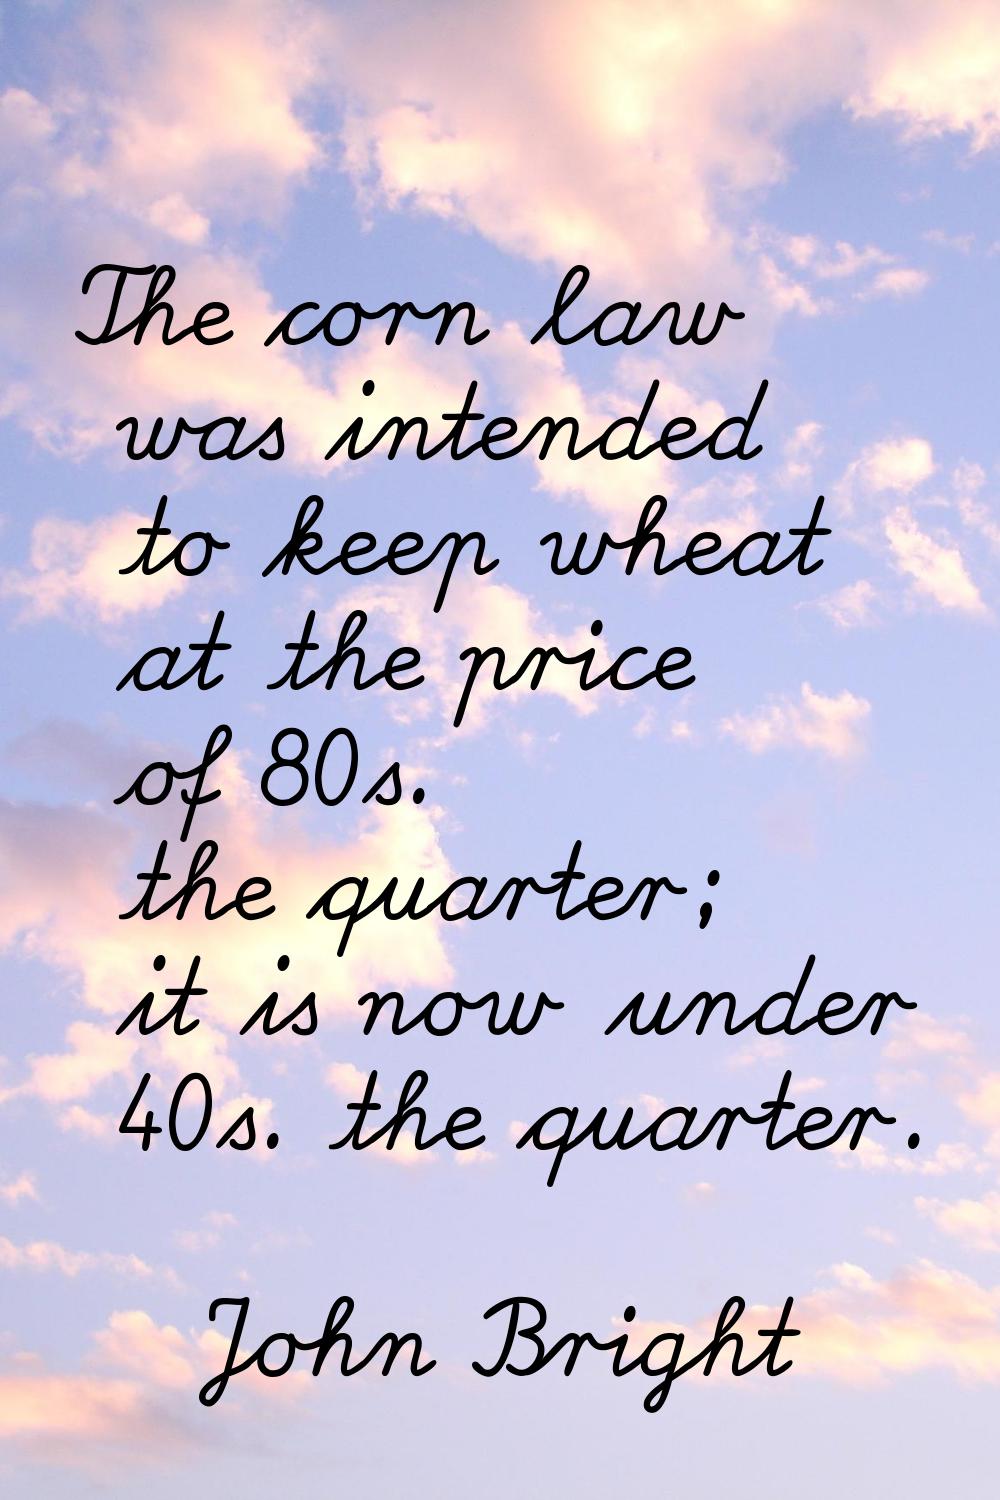 The corn law was intended to keep wheat at the price of 80s. the quarter; it is now under 40s. the 